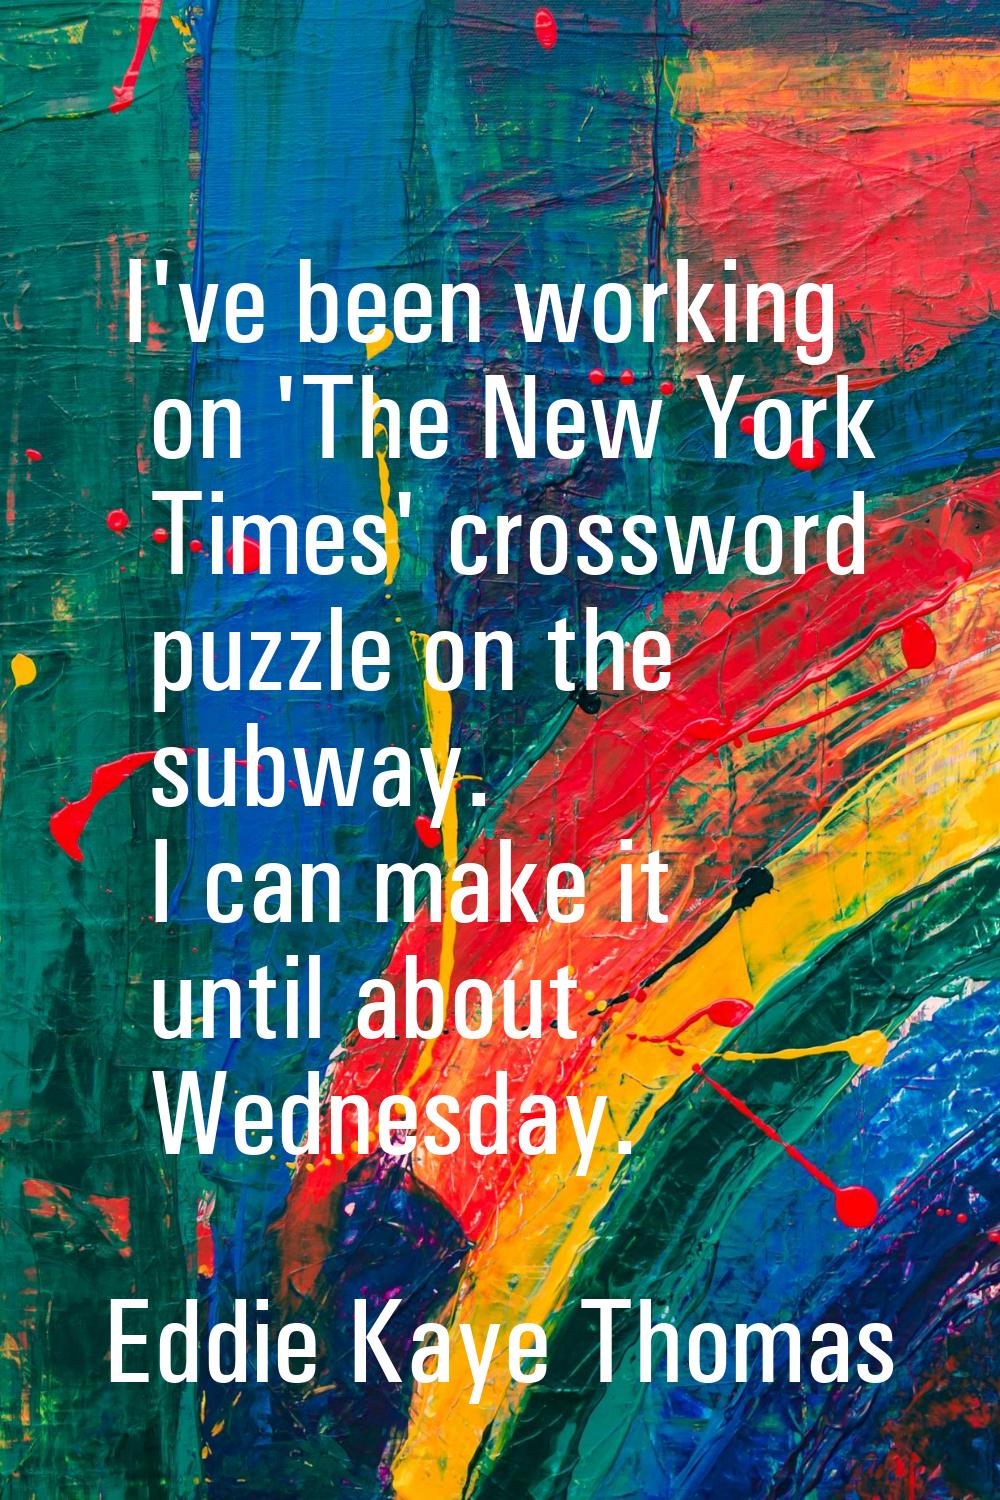 I've been working on 'The New York Times' crossword puzzle on the subway. I can make it until about